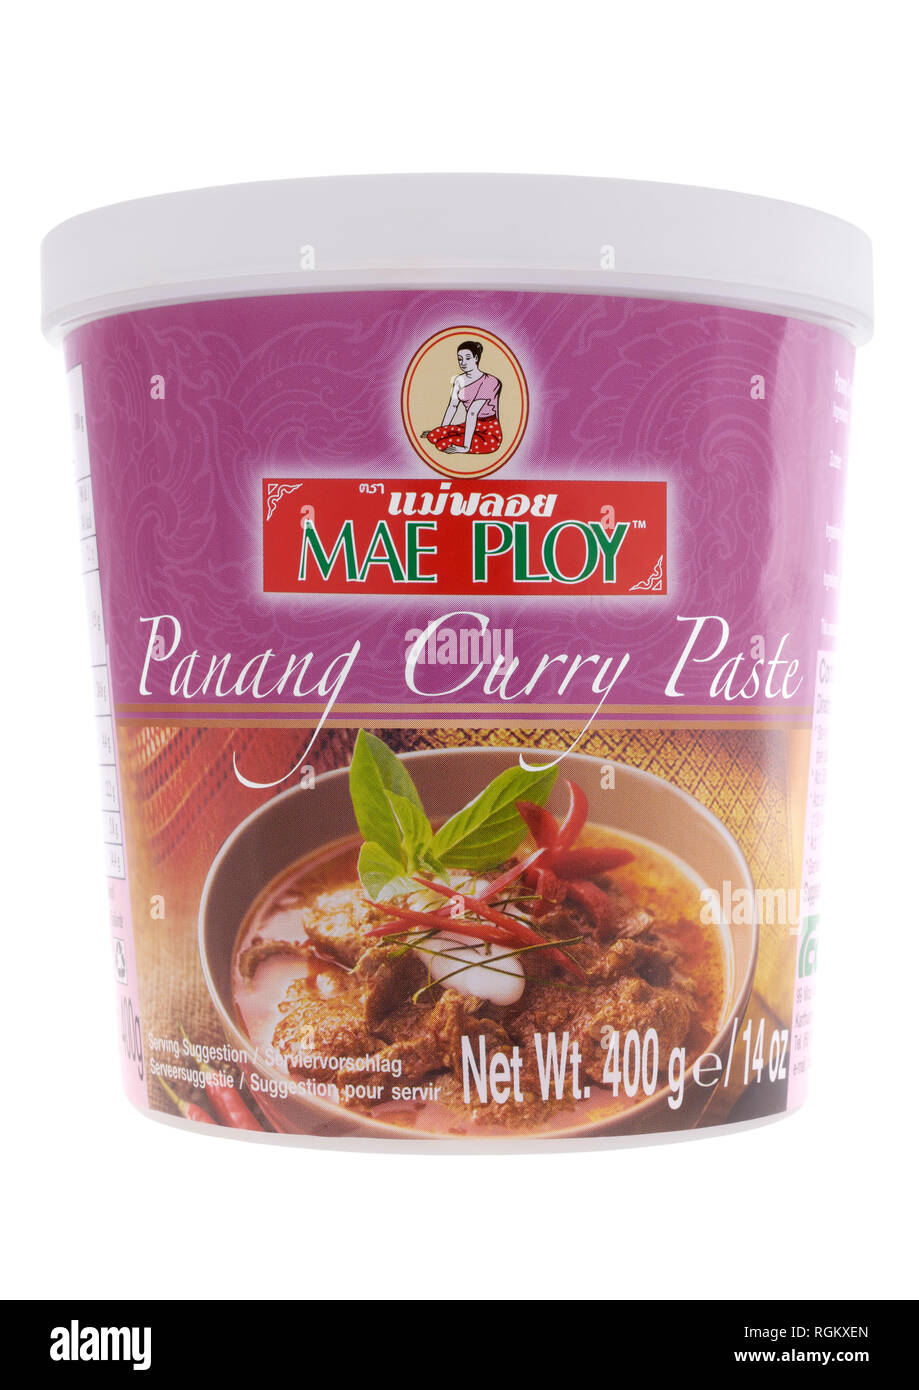 Tub of Mae Ploy panang curry paste on white background Stock Photo